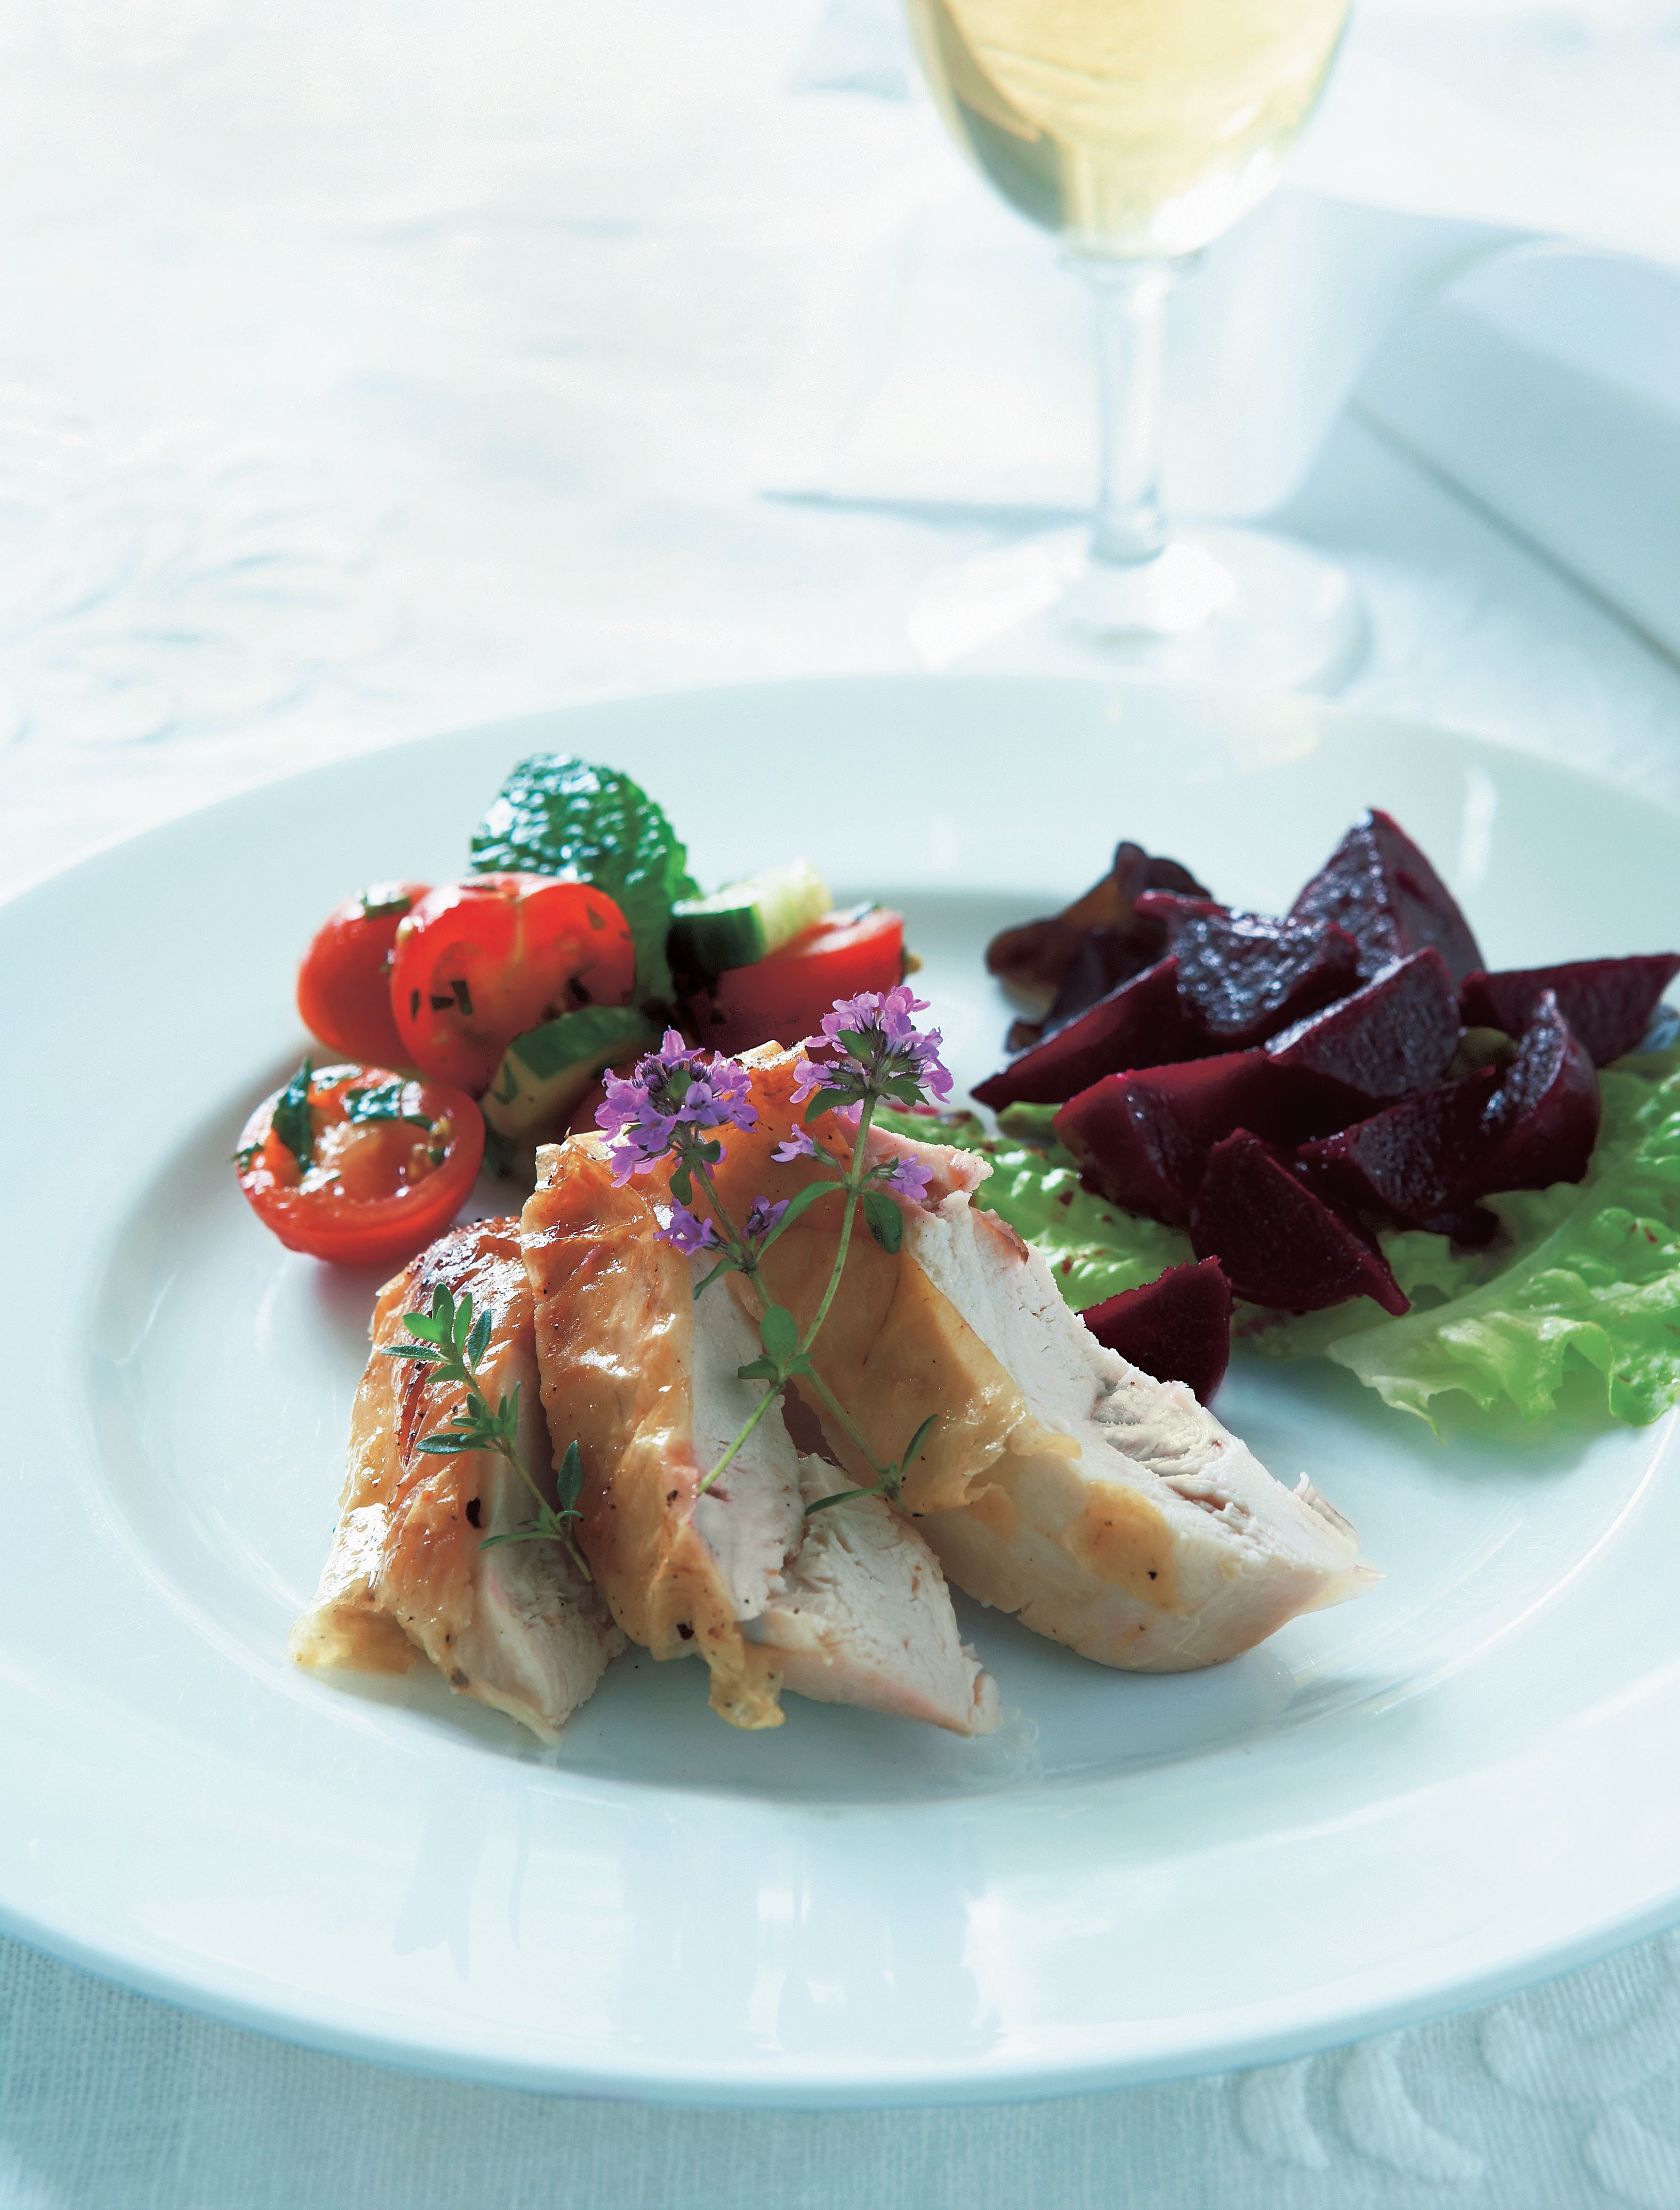 Lightly salted chicken with tomato-mint salad and beetroot salad